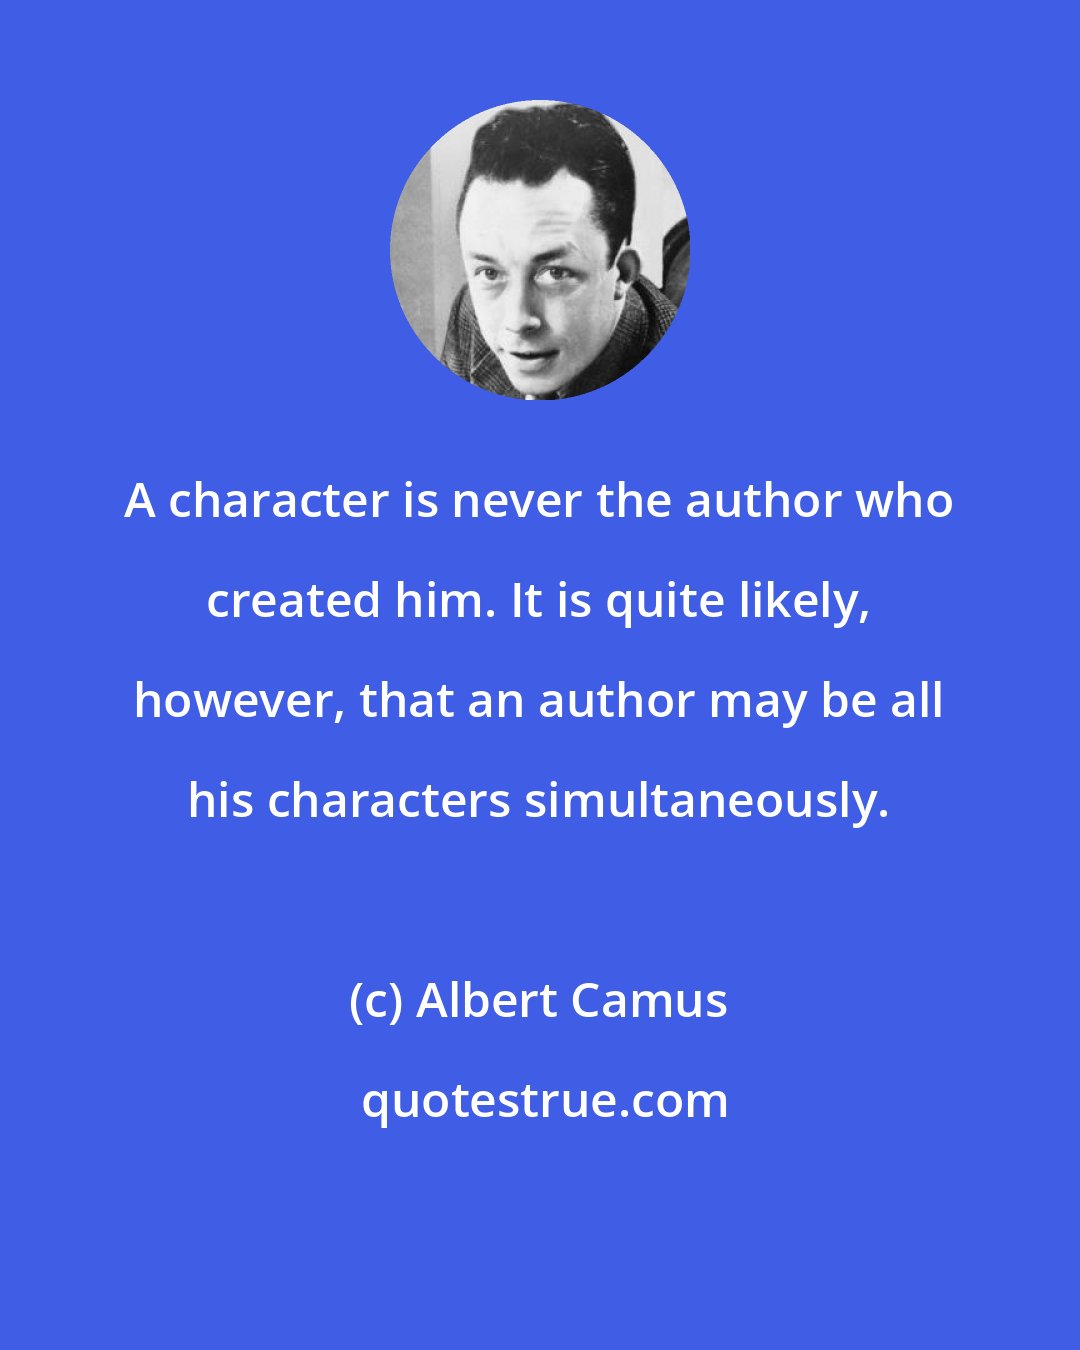 Albert Camus: A character is never the author who created him. It is quite likely, however, that an author may be all his characters simultaneously.